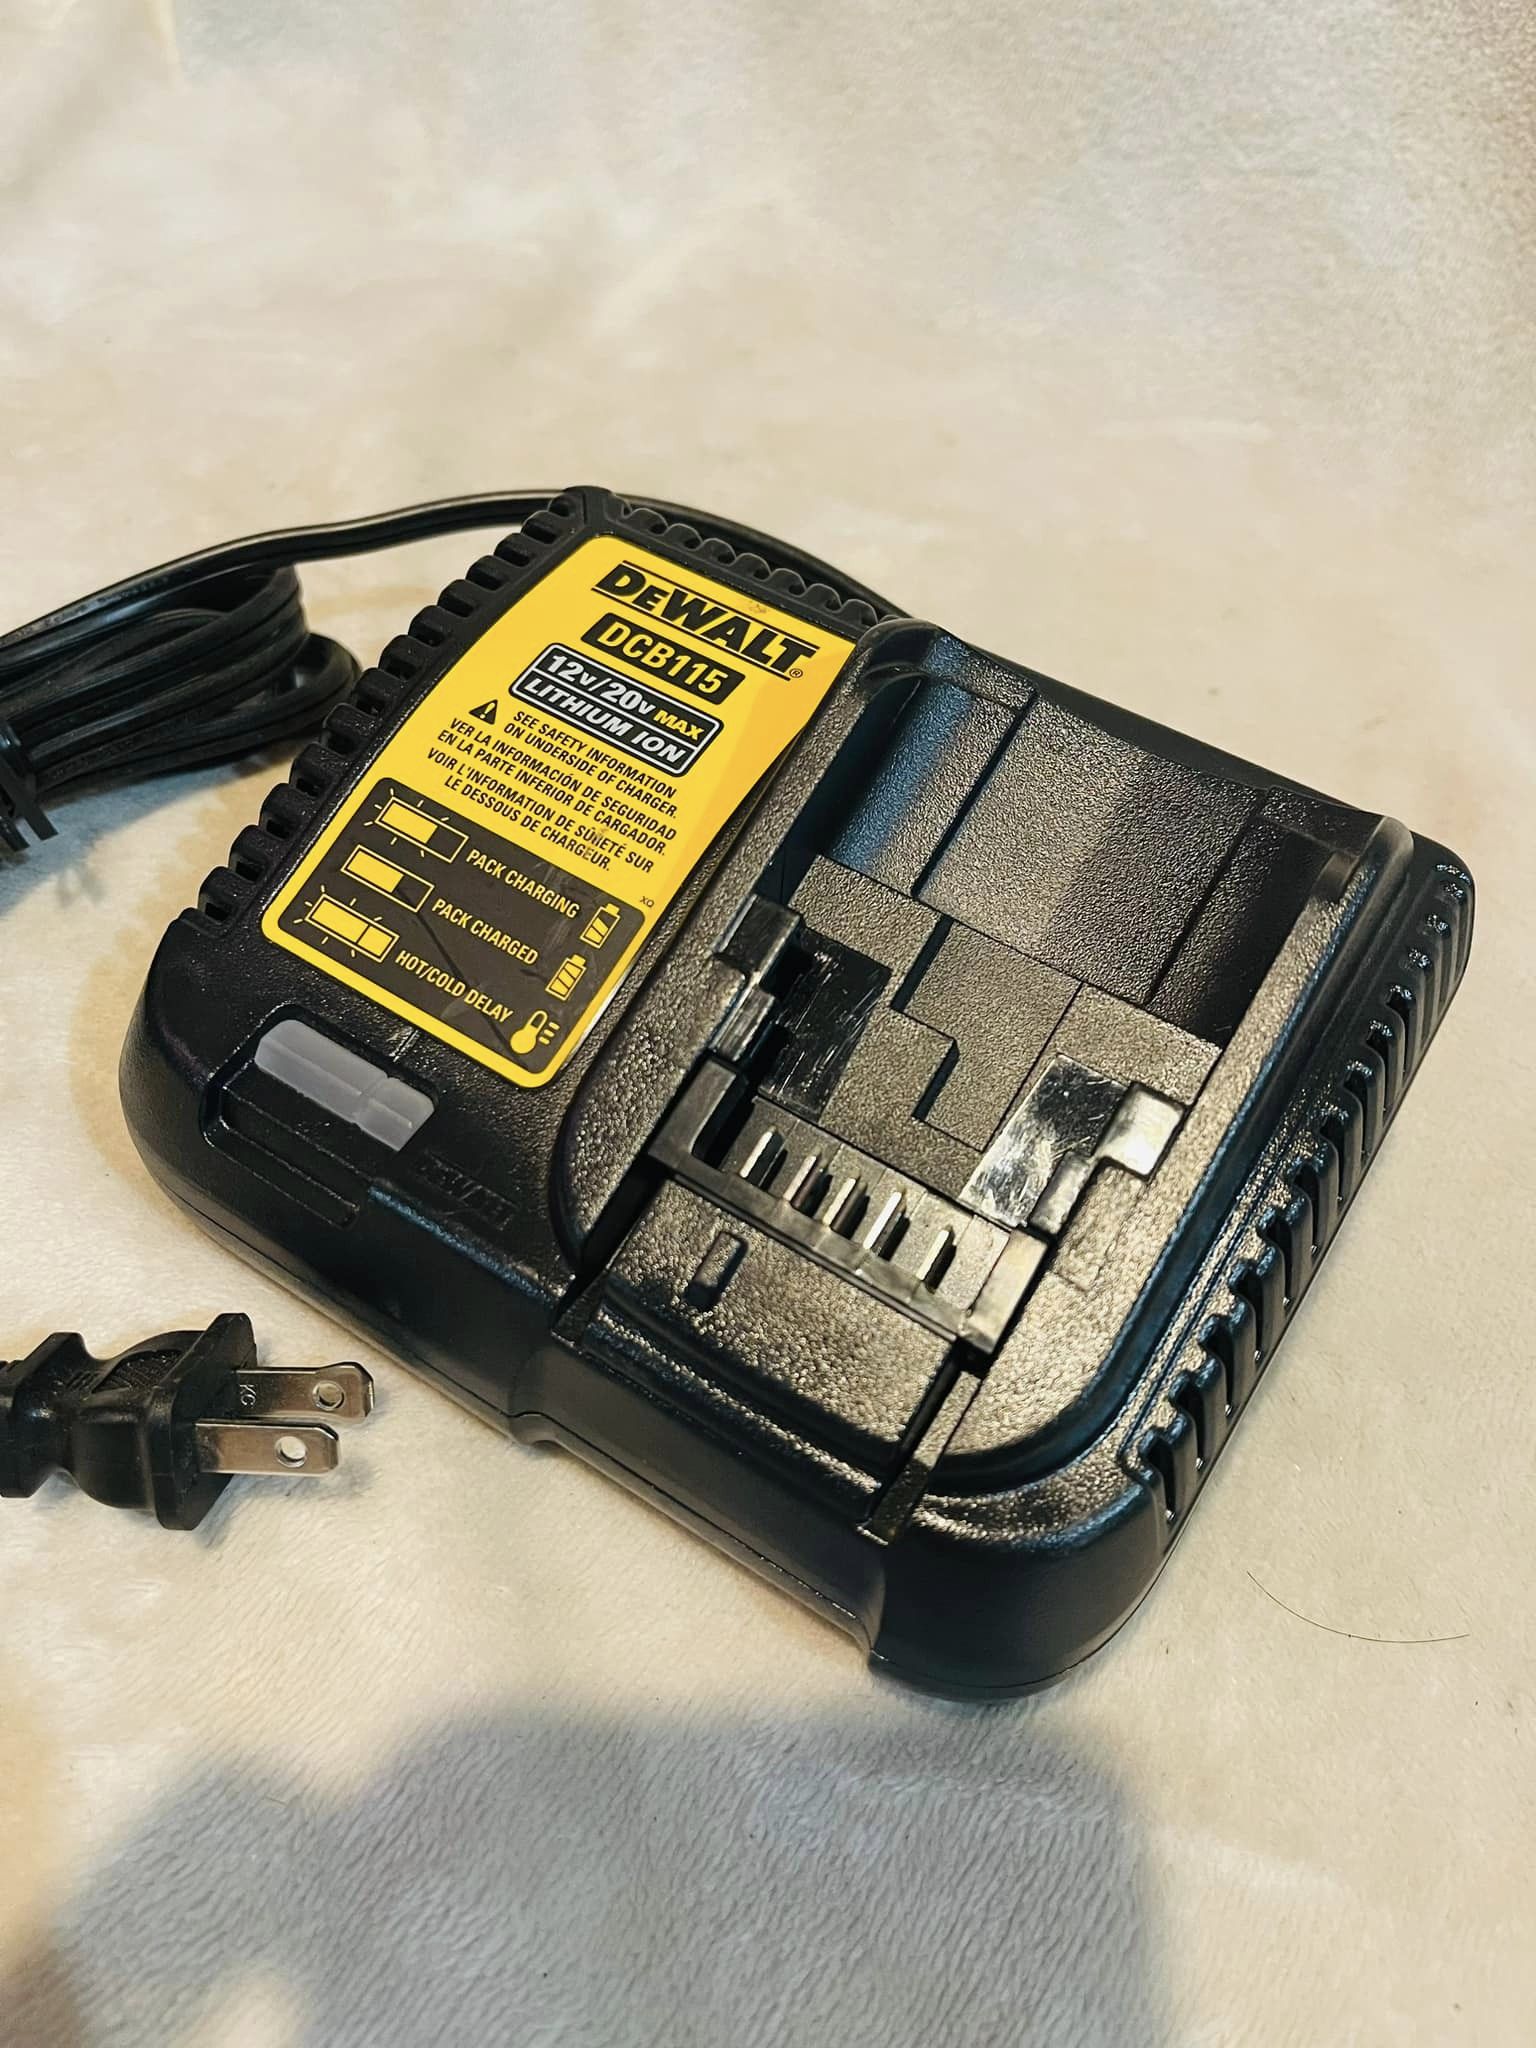 20V Lithium-Ion Battery Charger